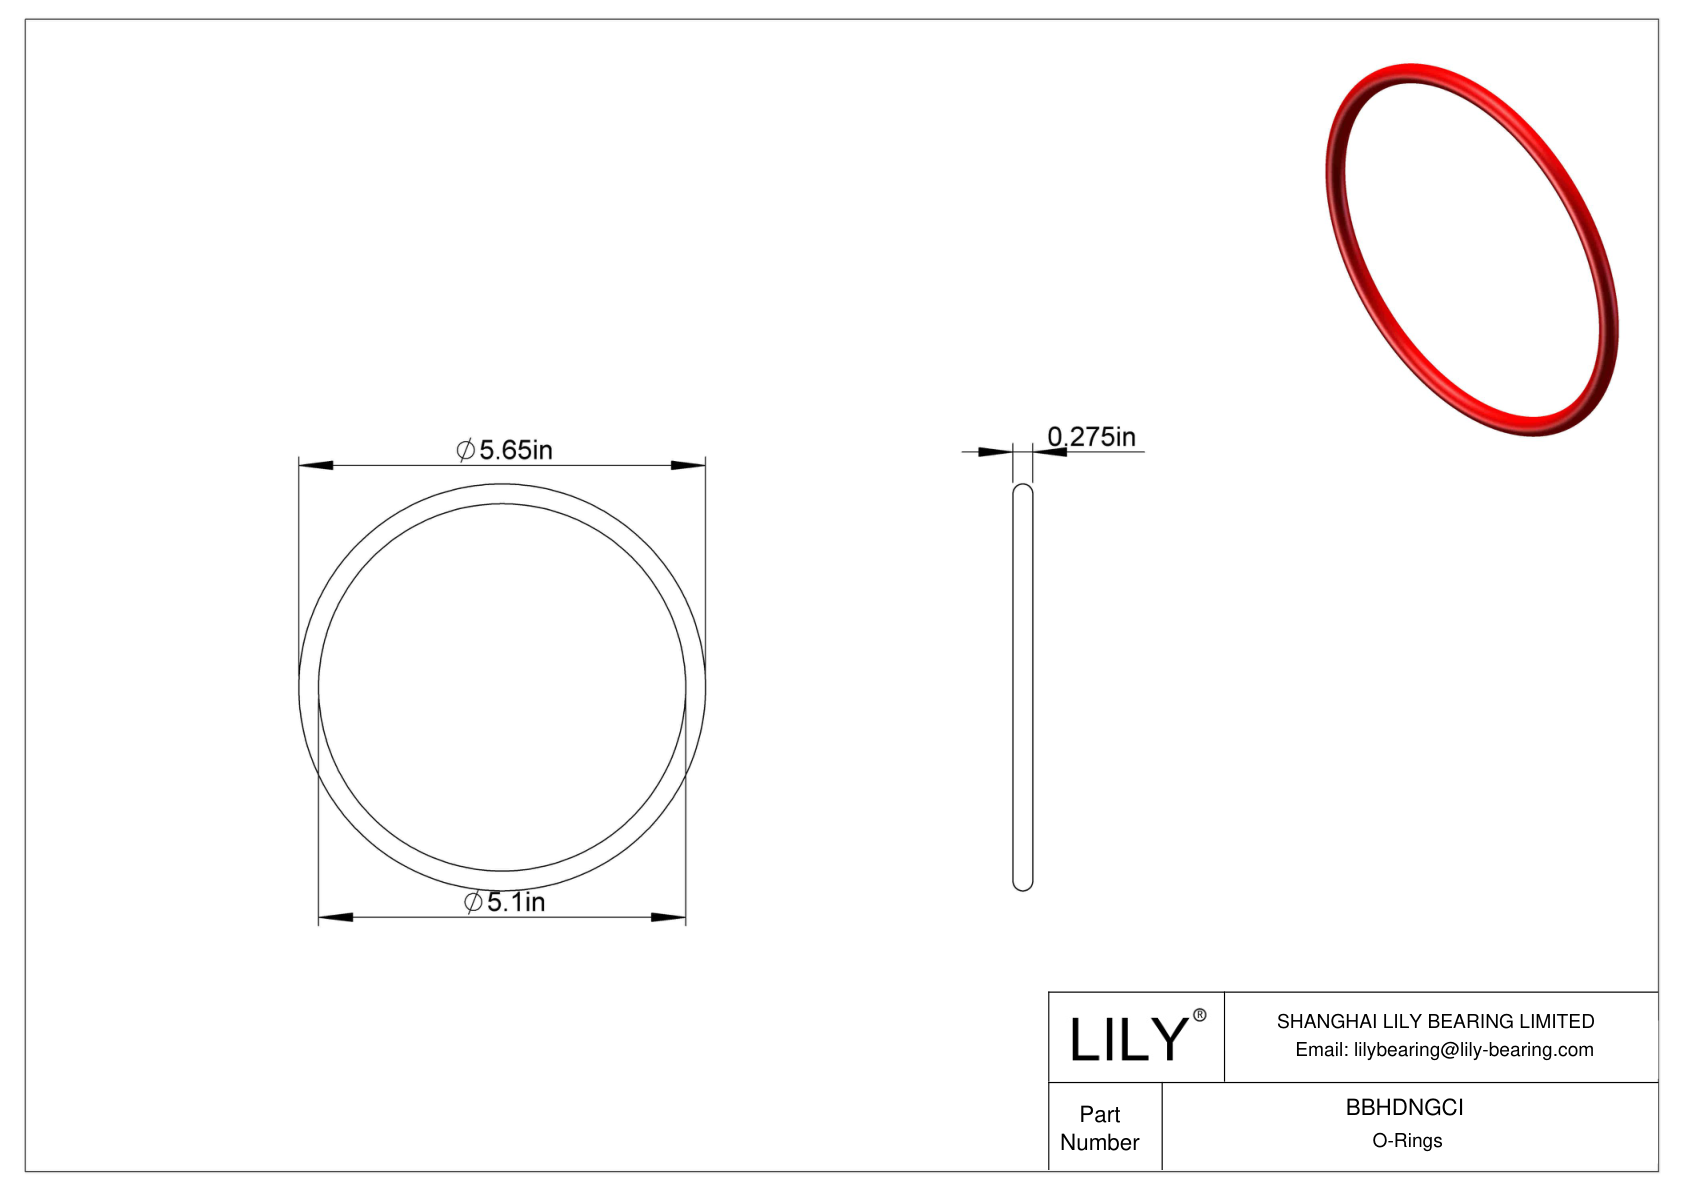 BBHDNGCI High Temperature O-Rings Round cad drawing